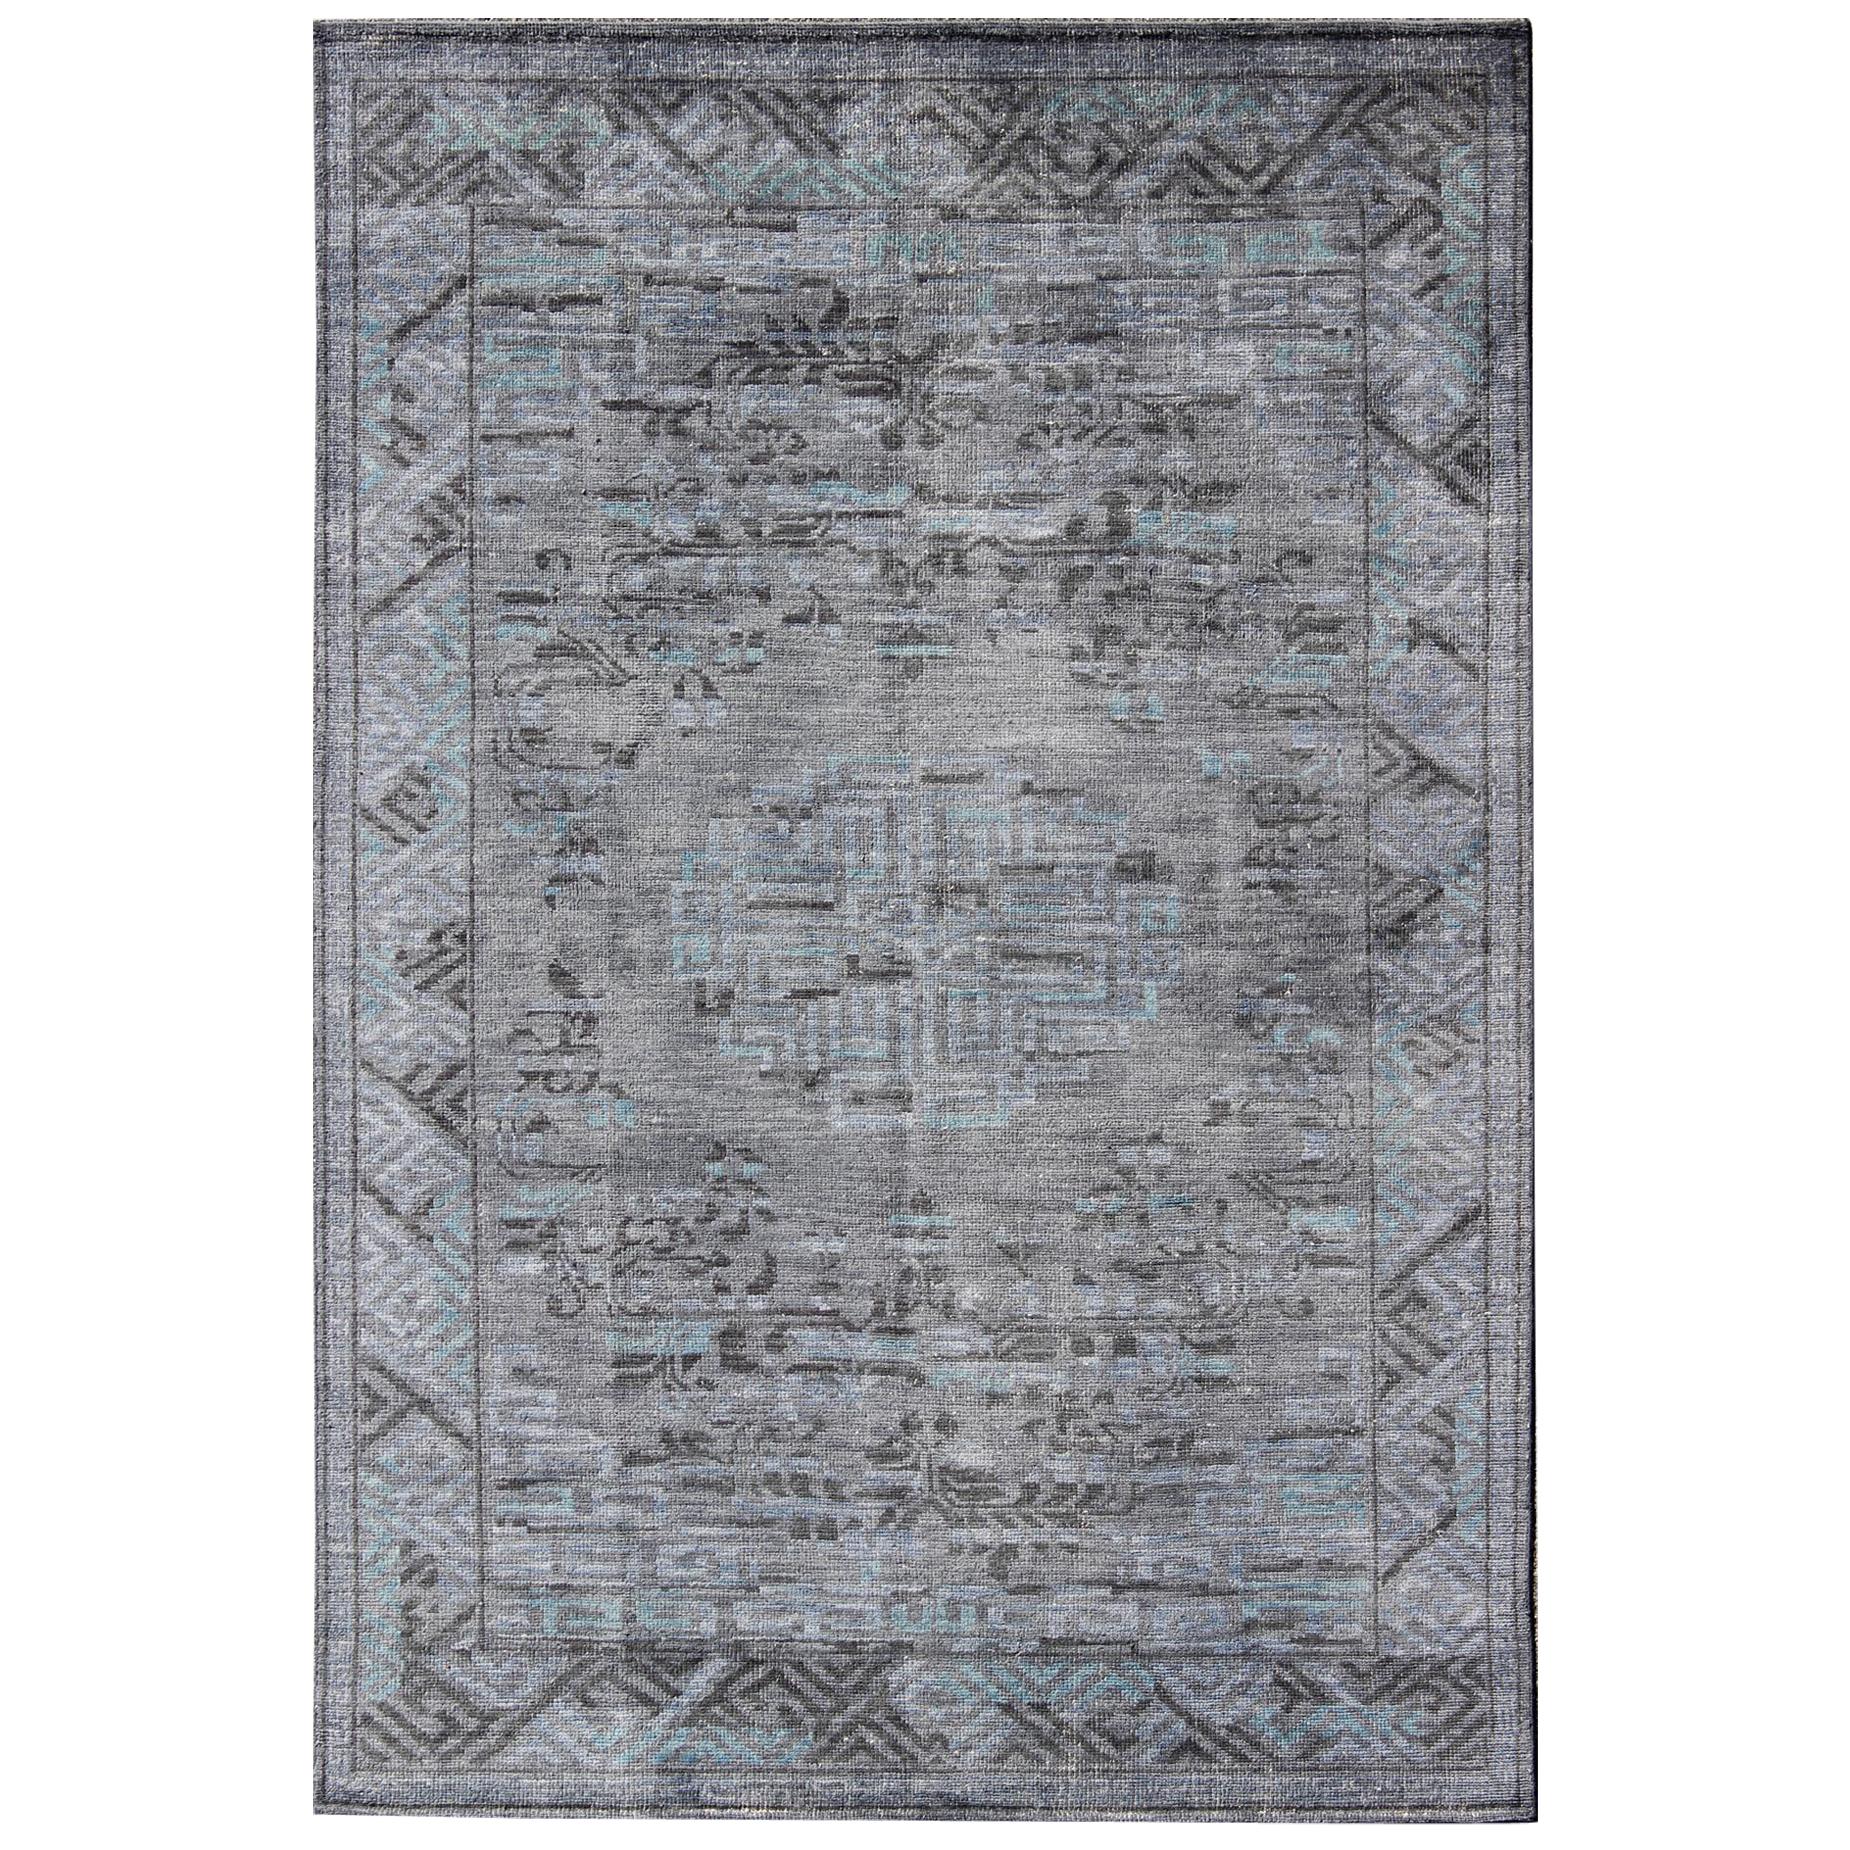 Modern Khotan with Medallion Design in Warm Gray, Brown, Blue and Charcoal For Sale